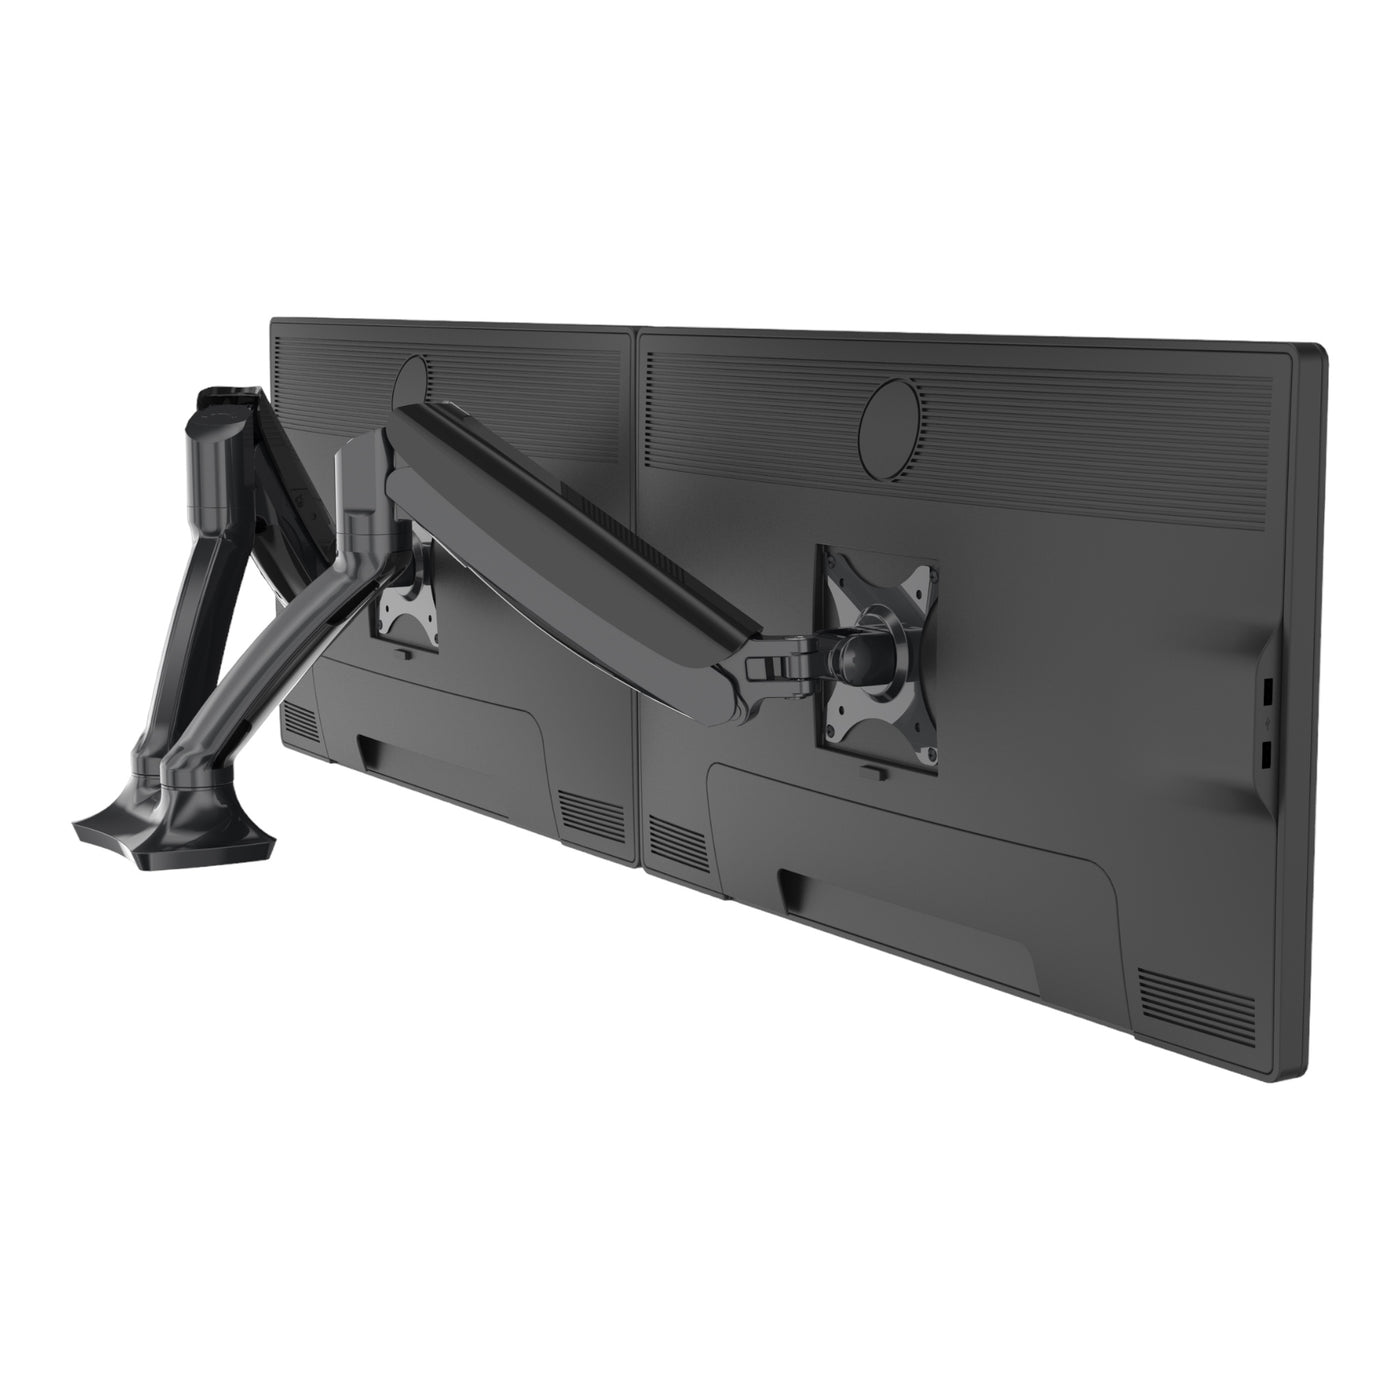 Renab - Double monitor arm